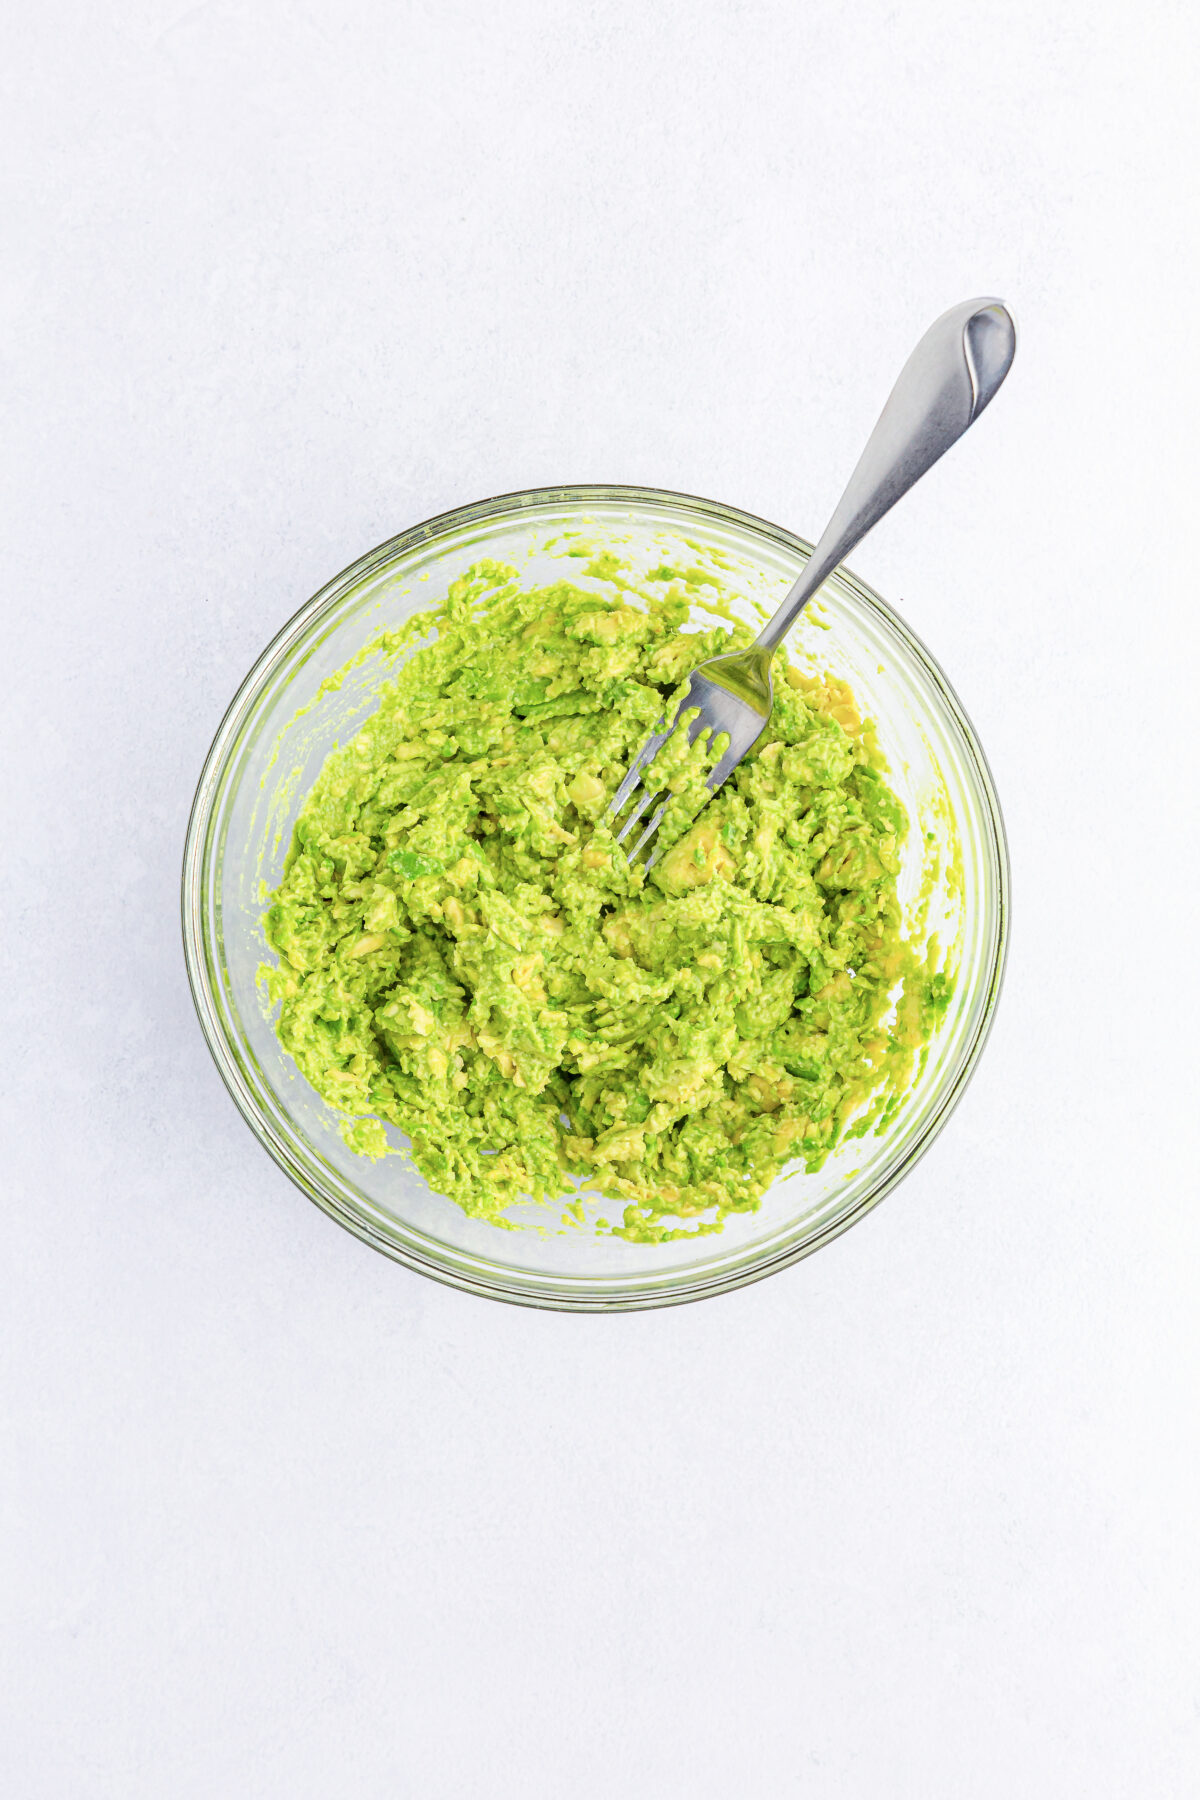 Avocado mashed with a fork in a glass bowl.